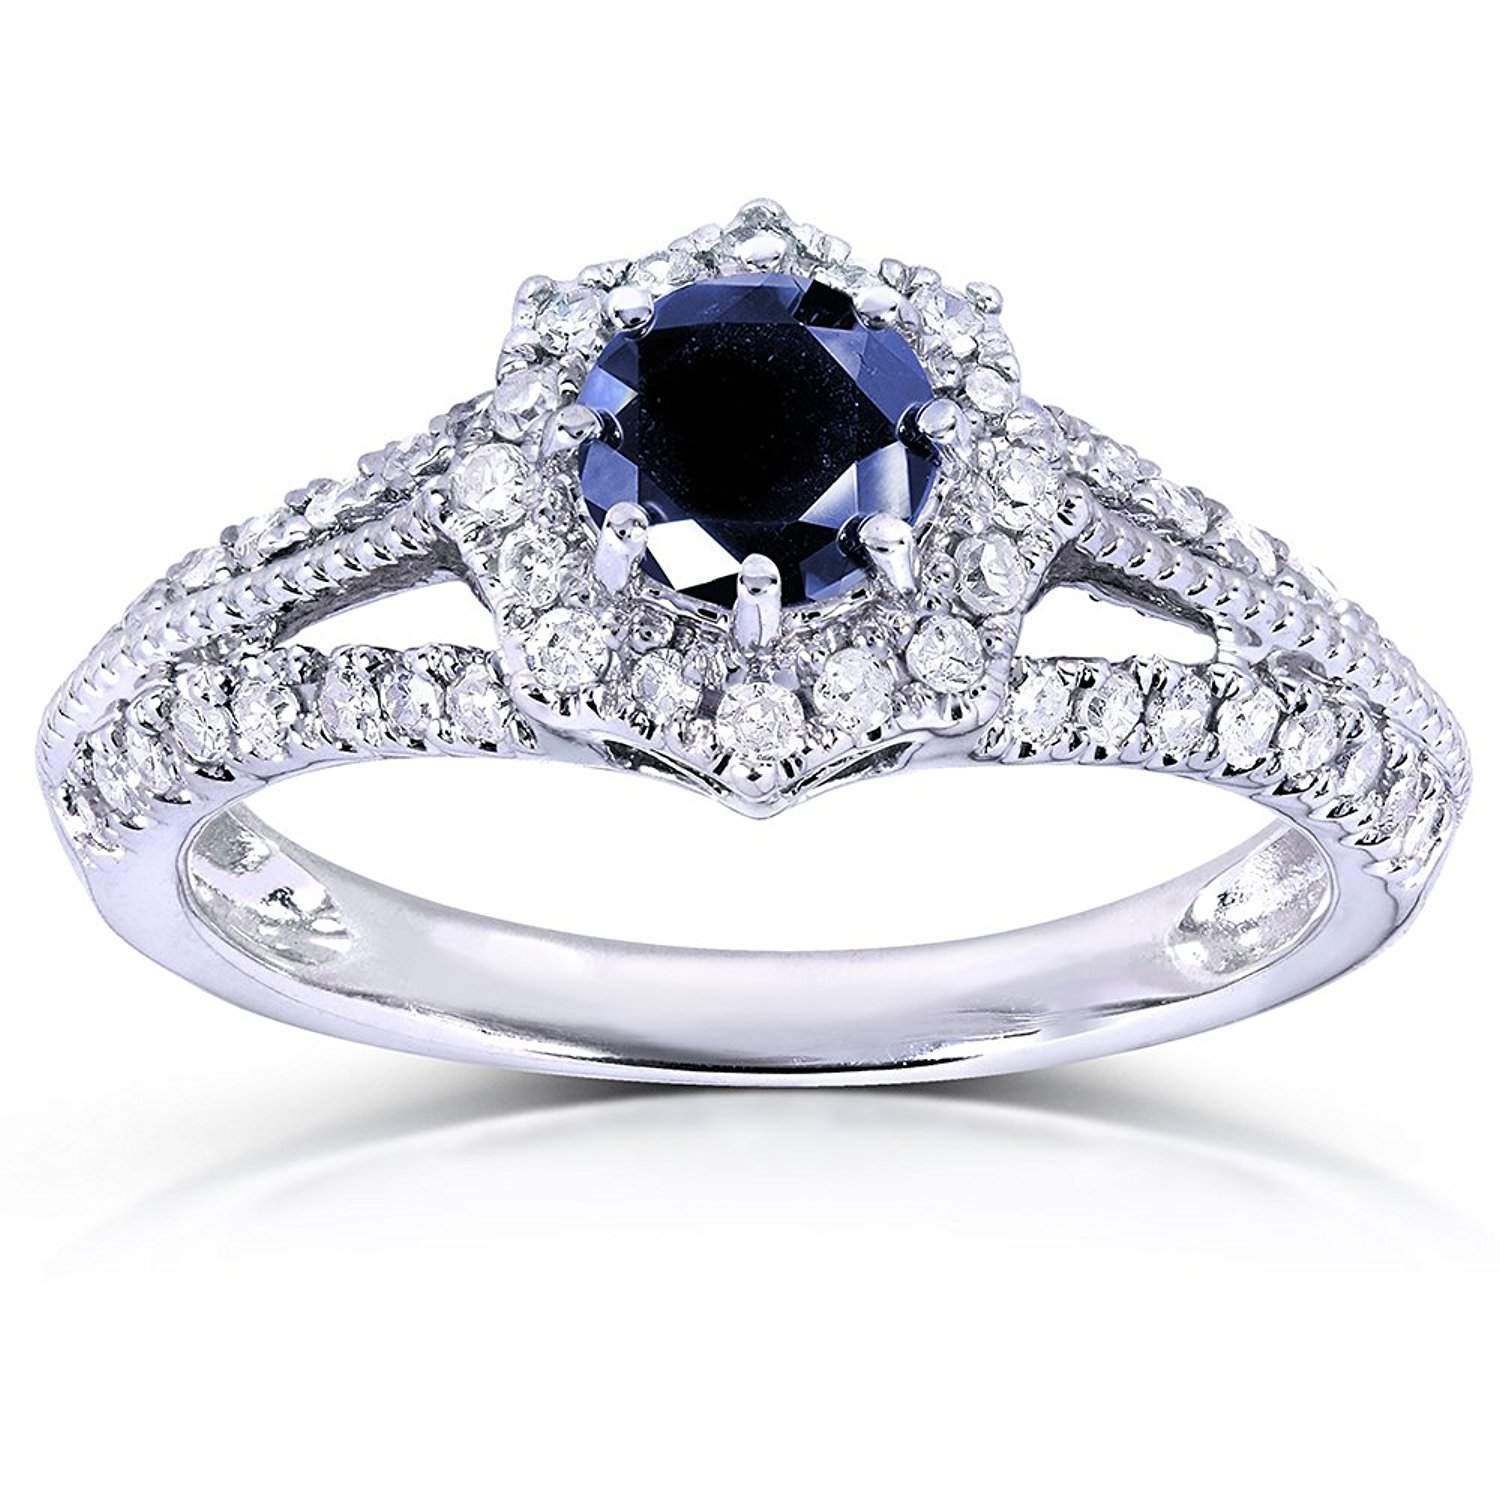 Cheap Diamond Engagement Ring
 Top 10 Best Valentine’s Day Deals on Engagement Rings